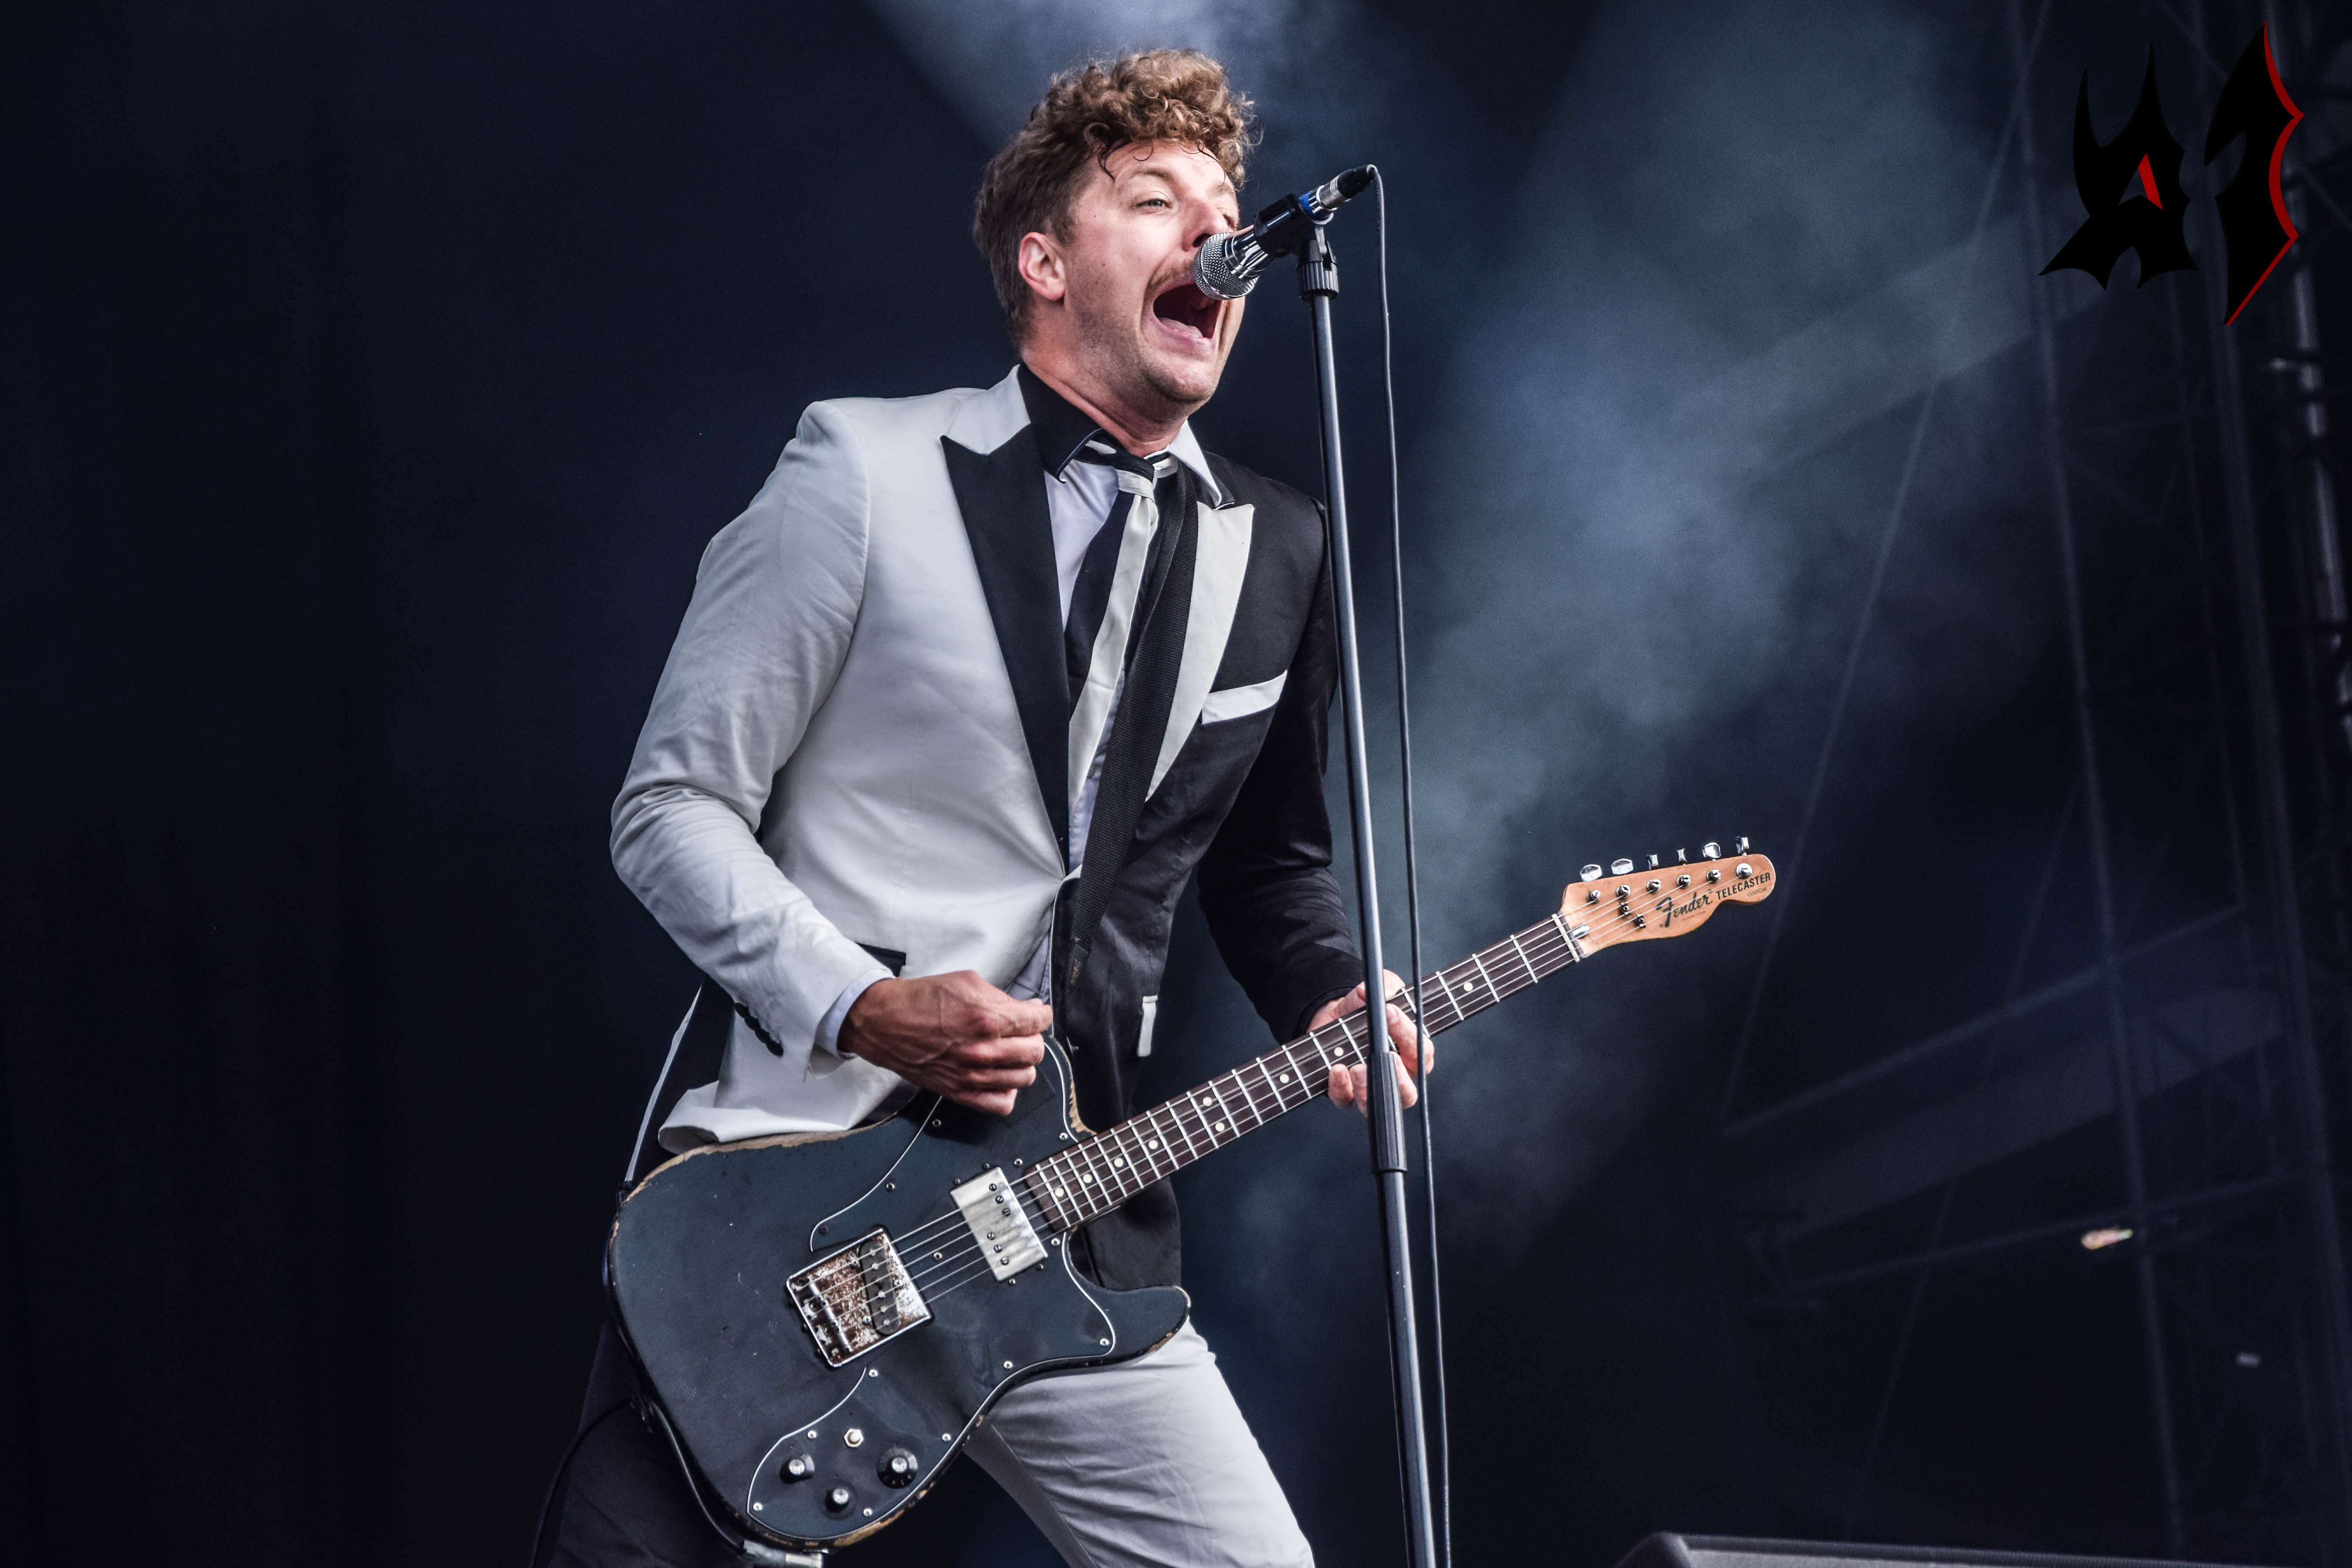 Donwload 2018 – Day 3 - The Hives 29